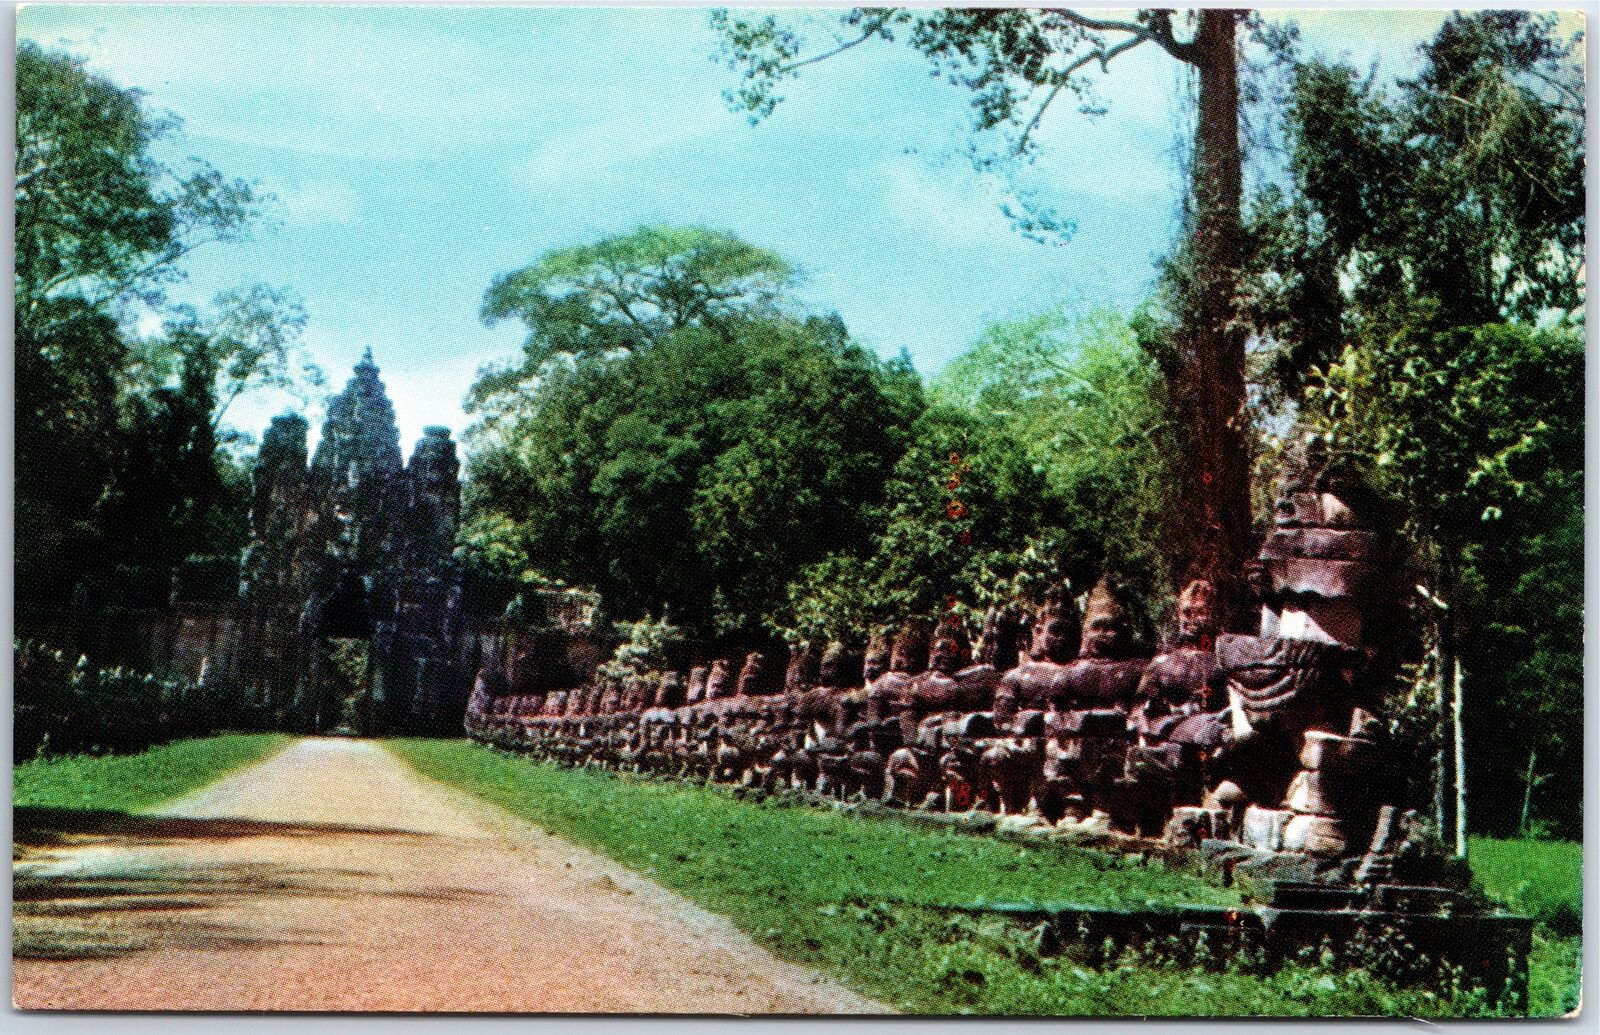 VINTAGE POSTCARD CAUSEWAY TO THE GATE OF VICTORY AT ANGKOR WAT CAMBODIA 1960s